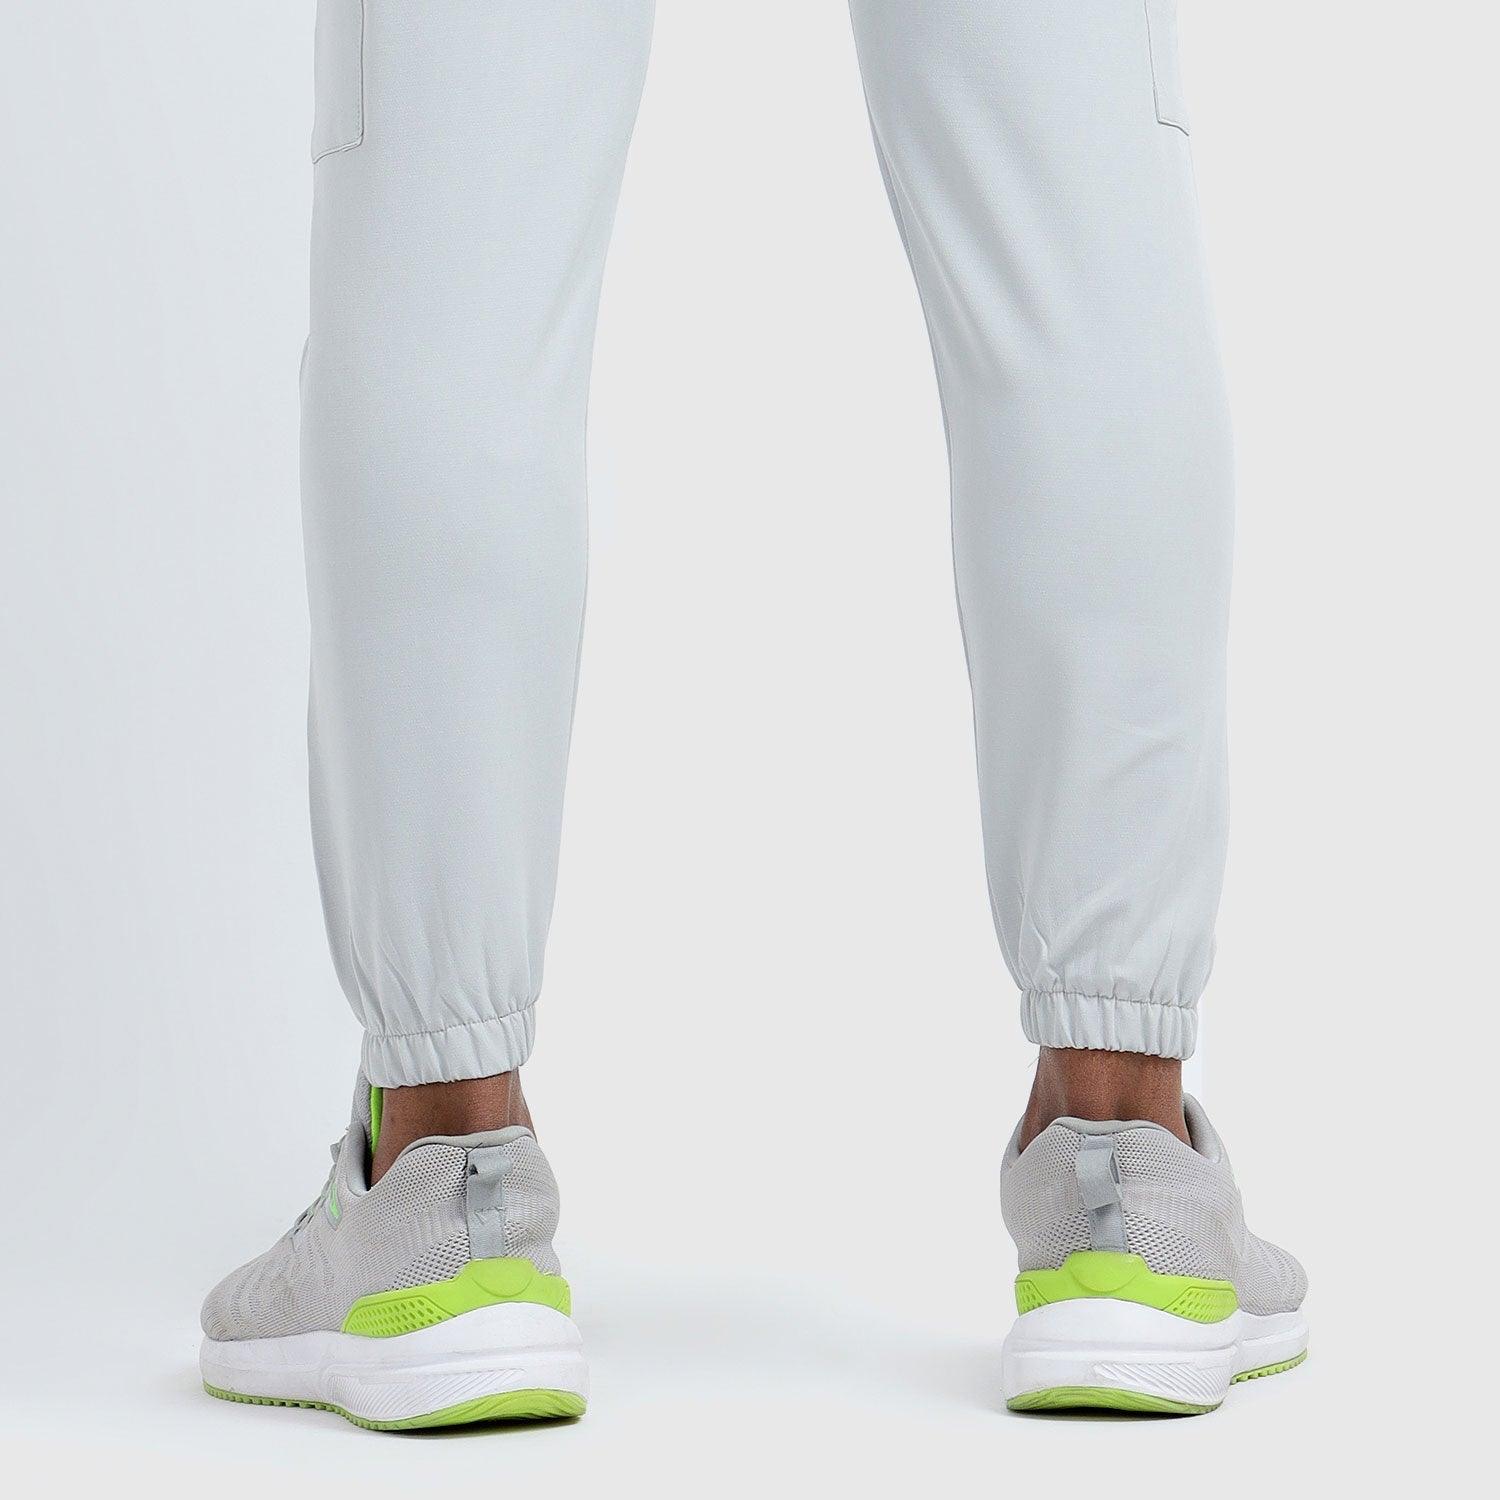 Denmonk: Elevate your look with these Cragopro sharp light grey  Trackpant for mens.